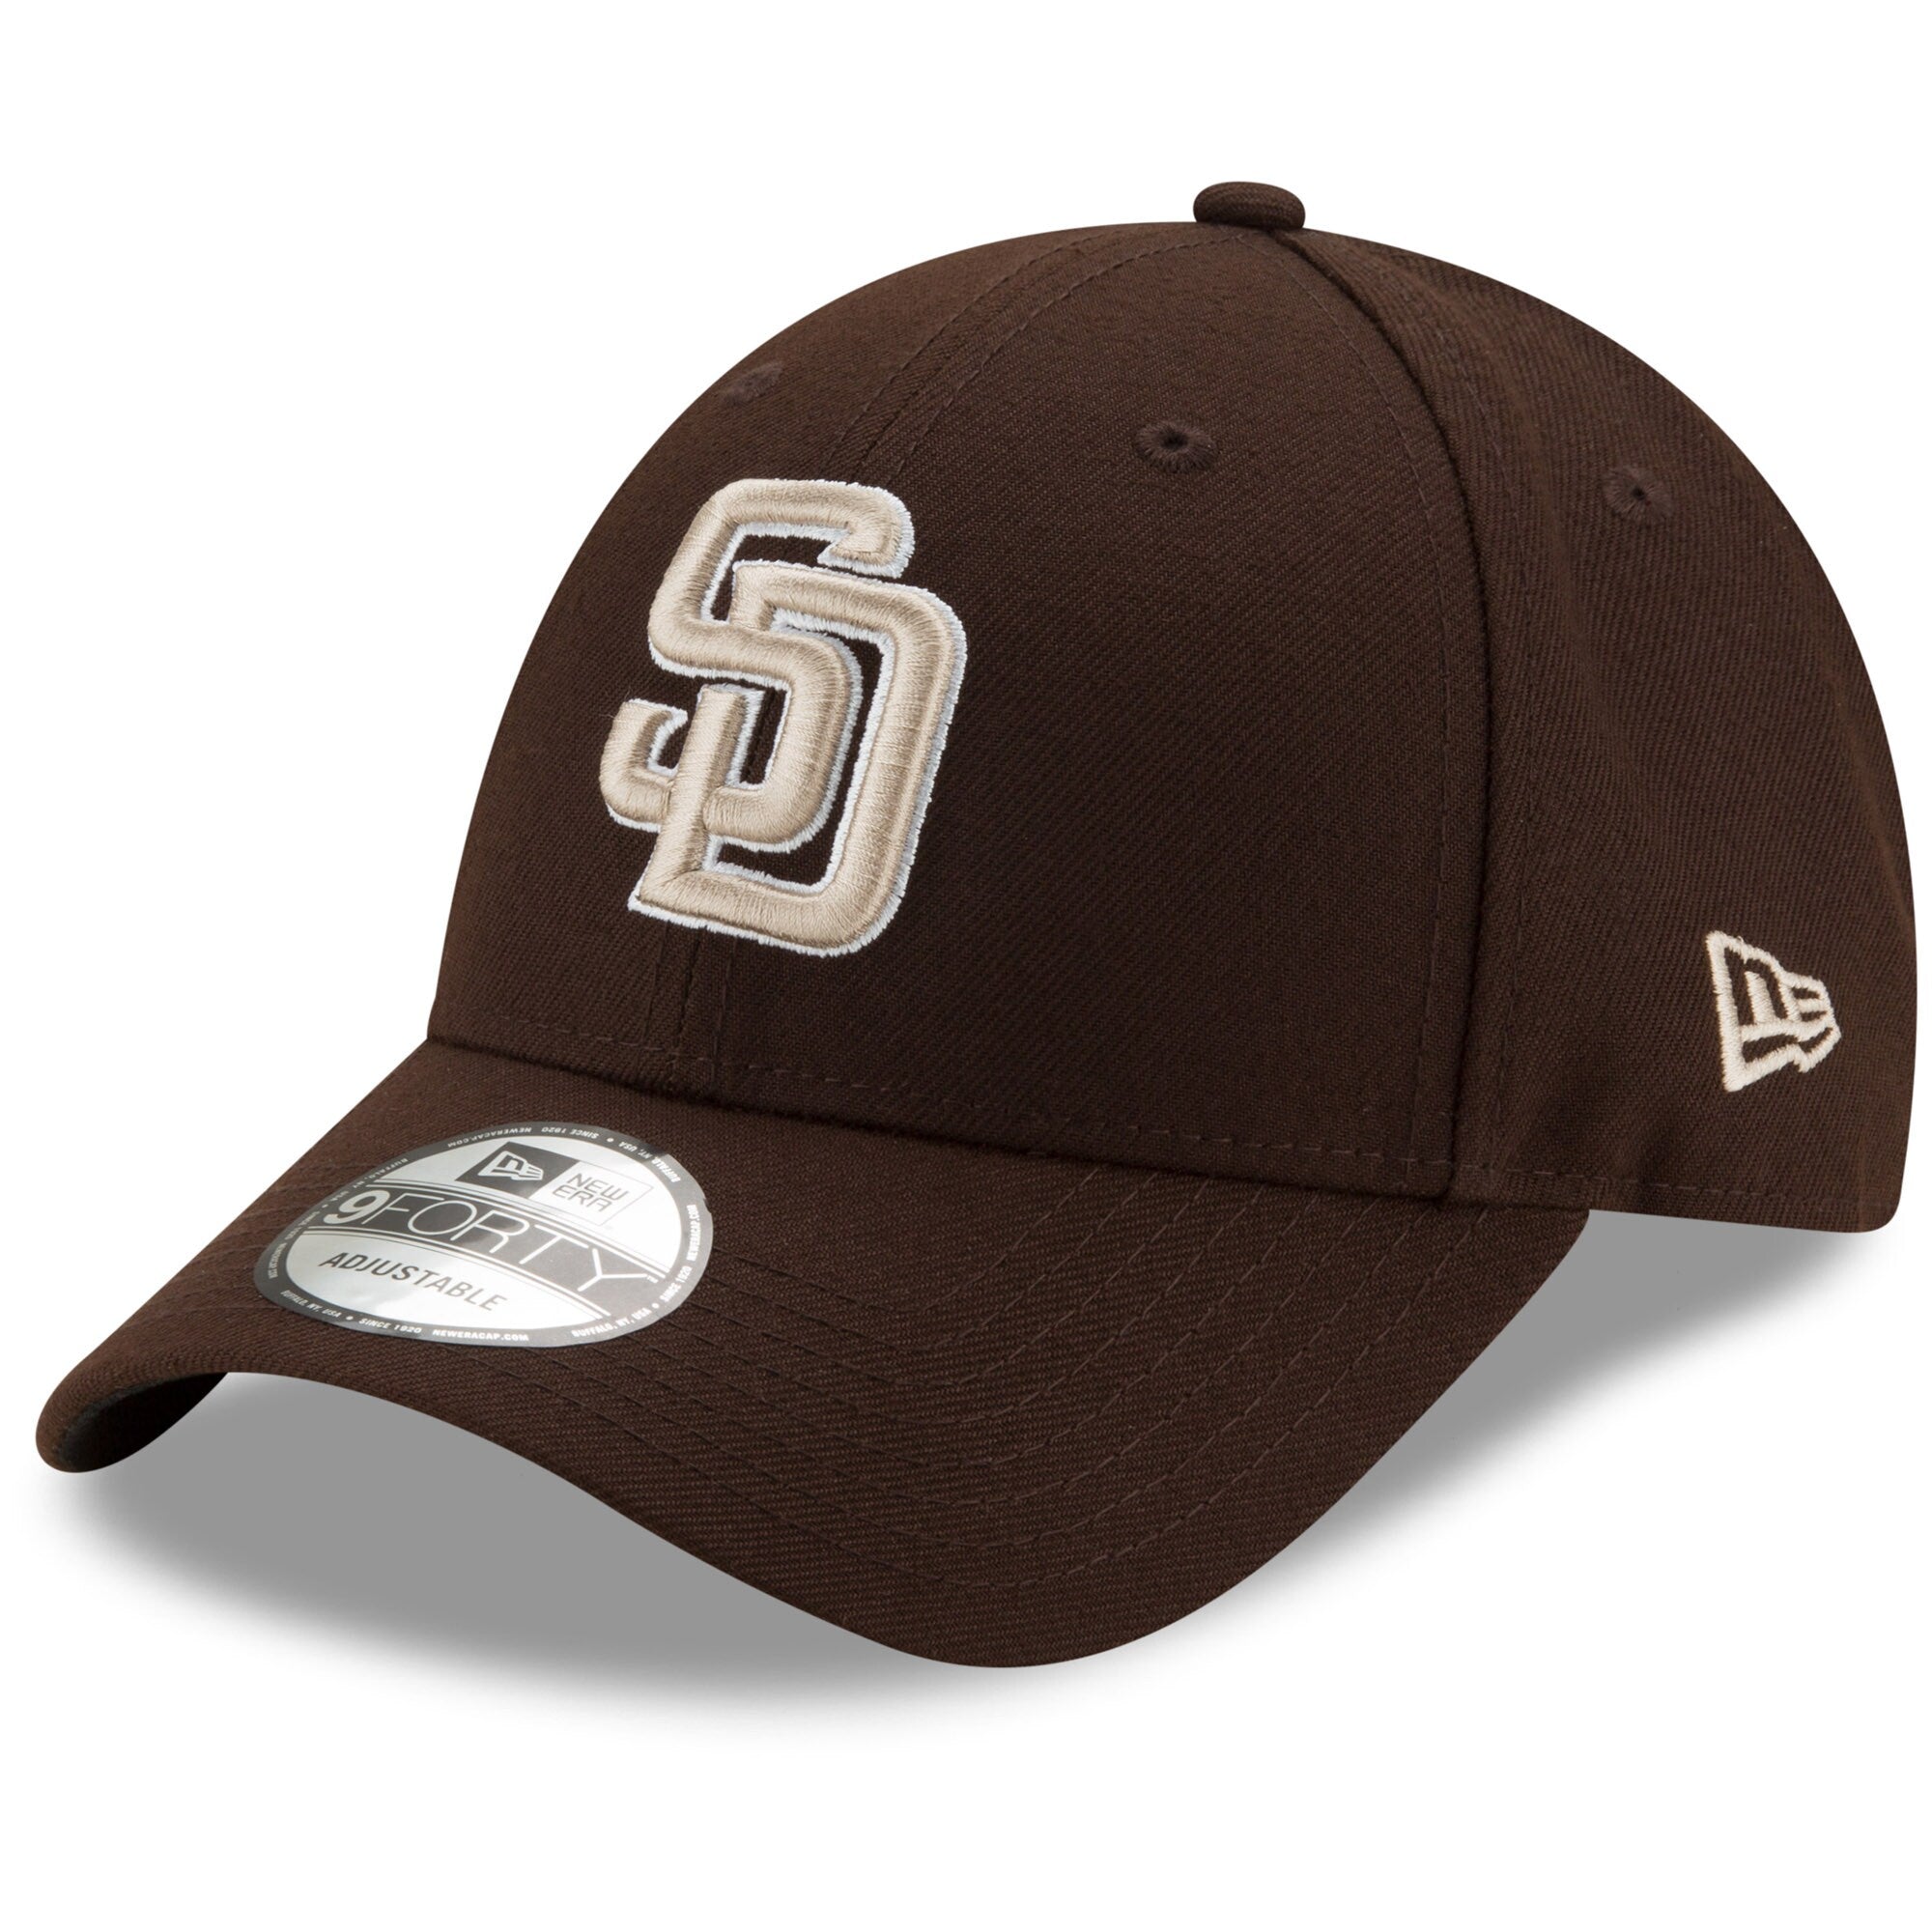 New Era Men's San Diego Padres 59Fifty Alternate Brown Authentic